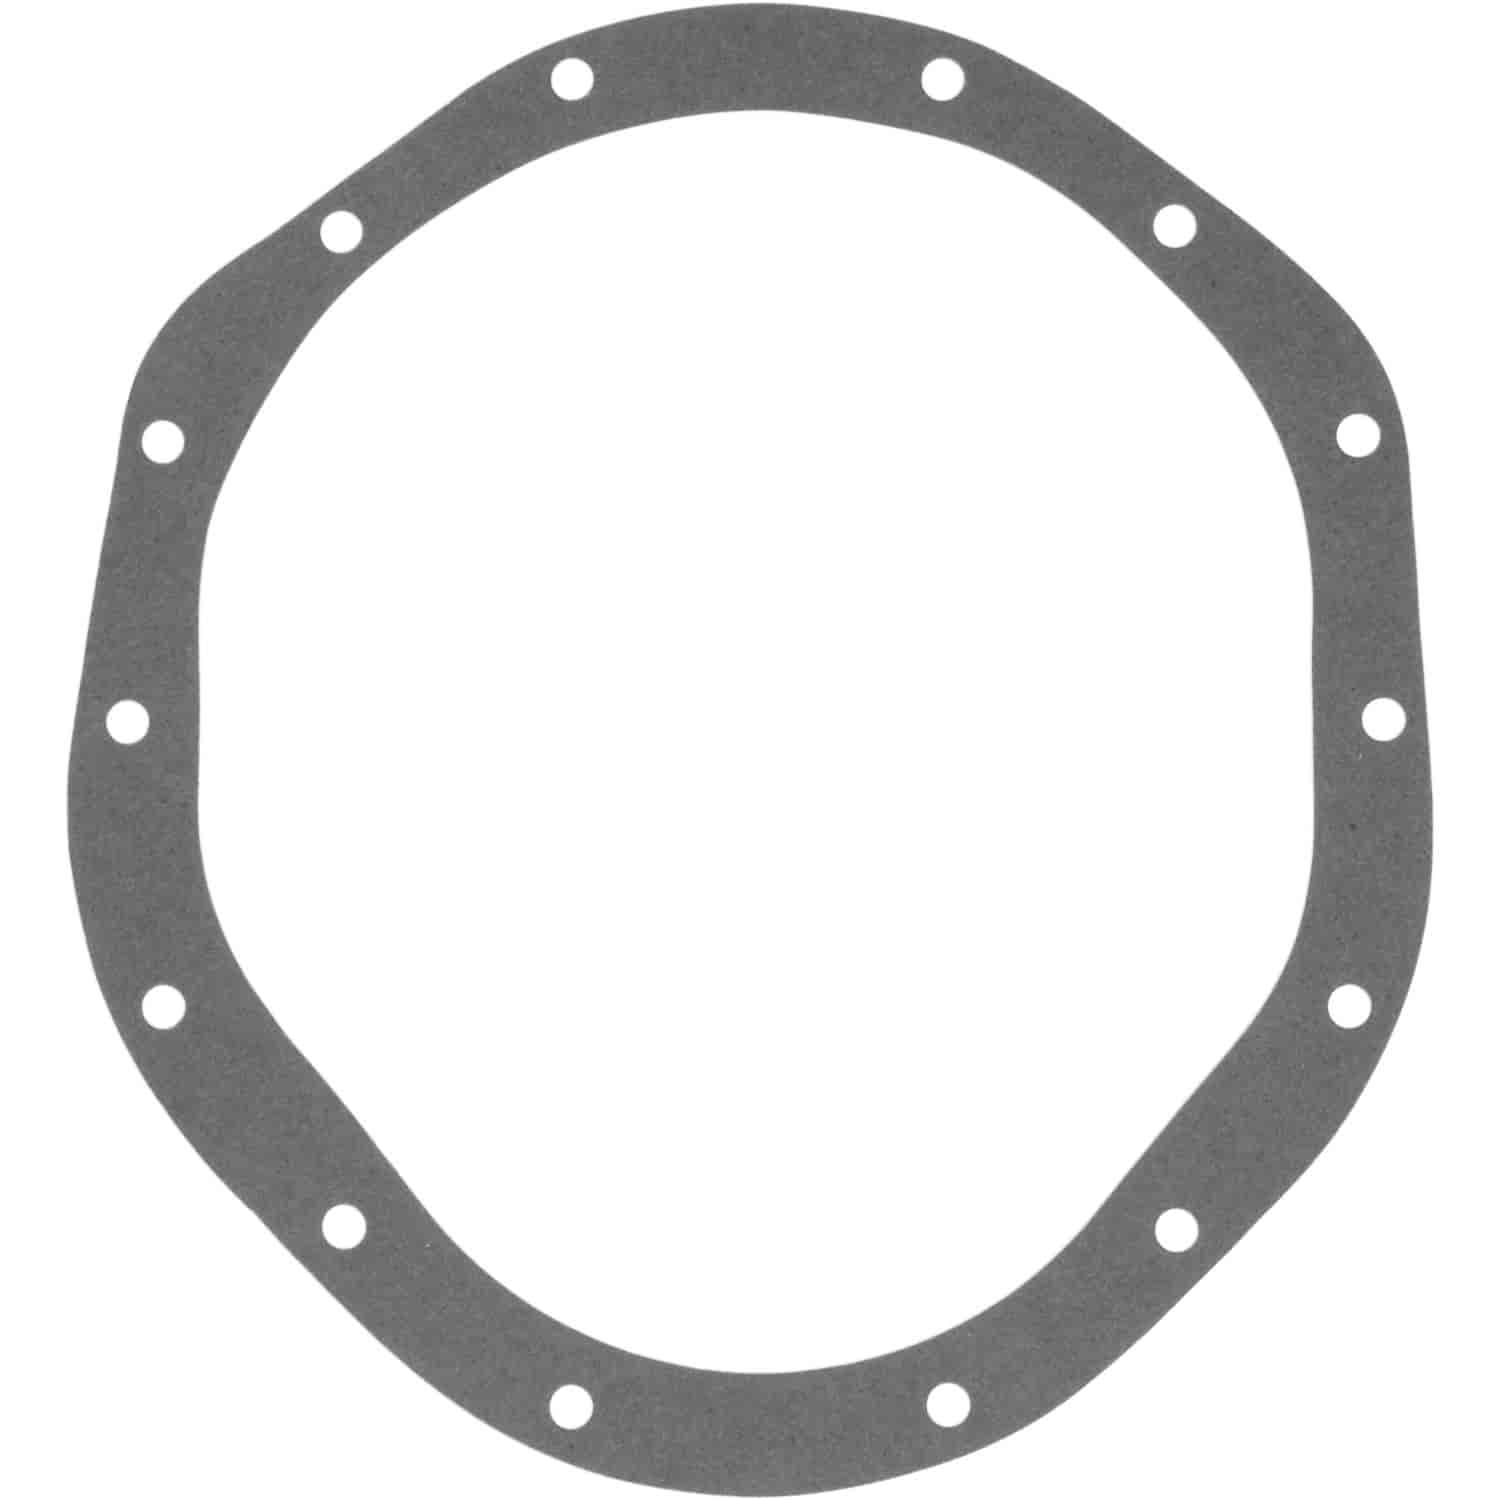 Differential Cover Gasket GMC 14-Bolt Truck (9.5